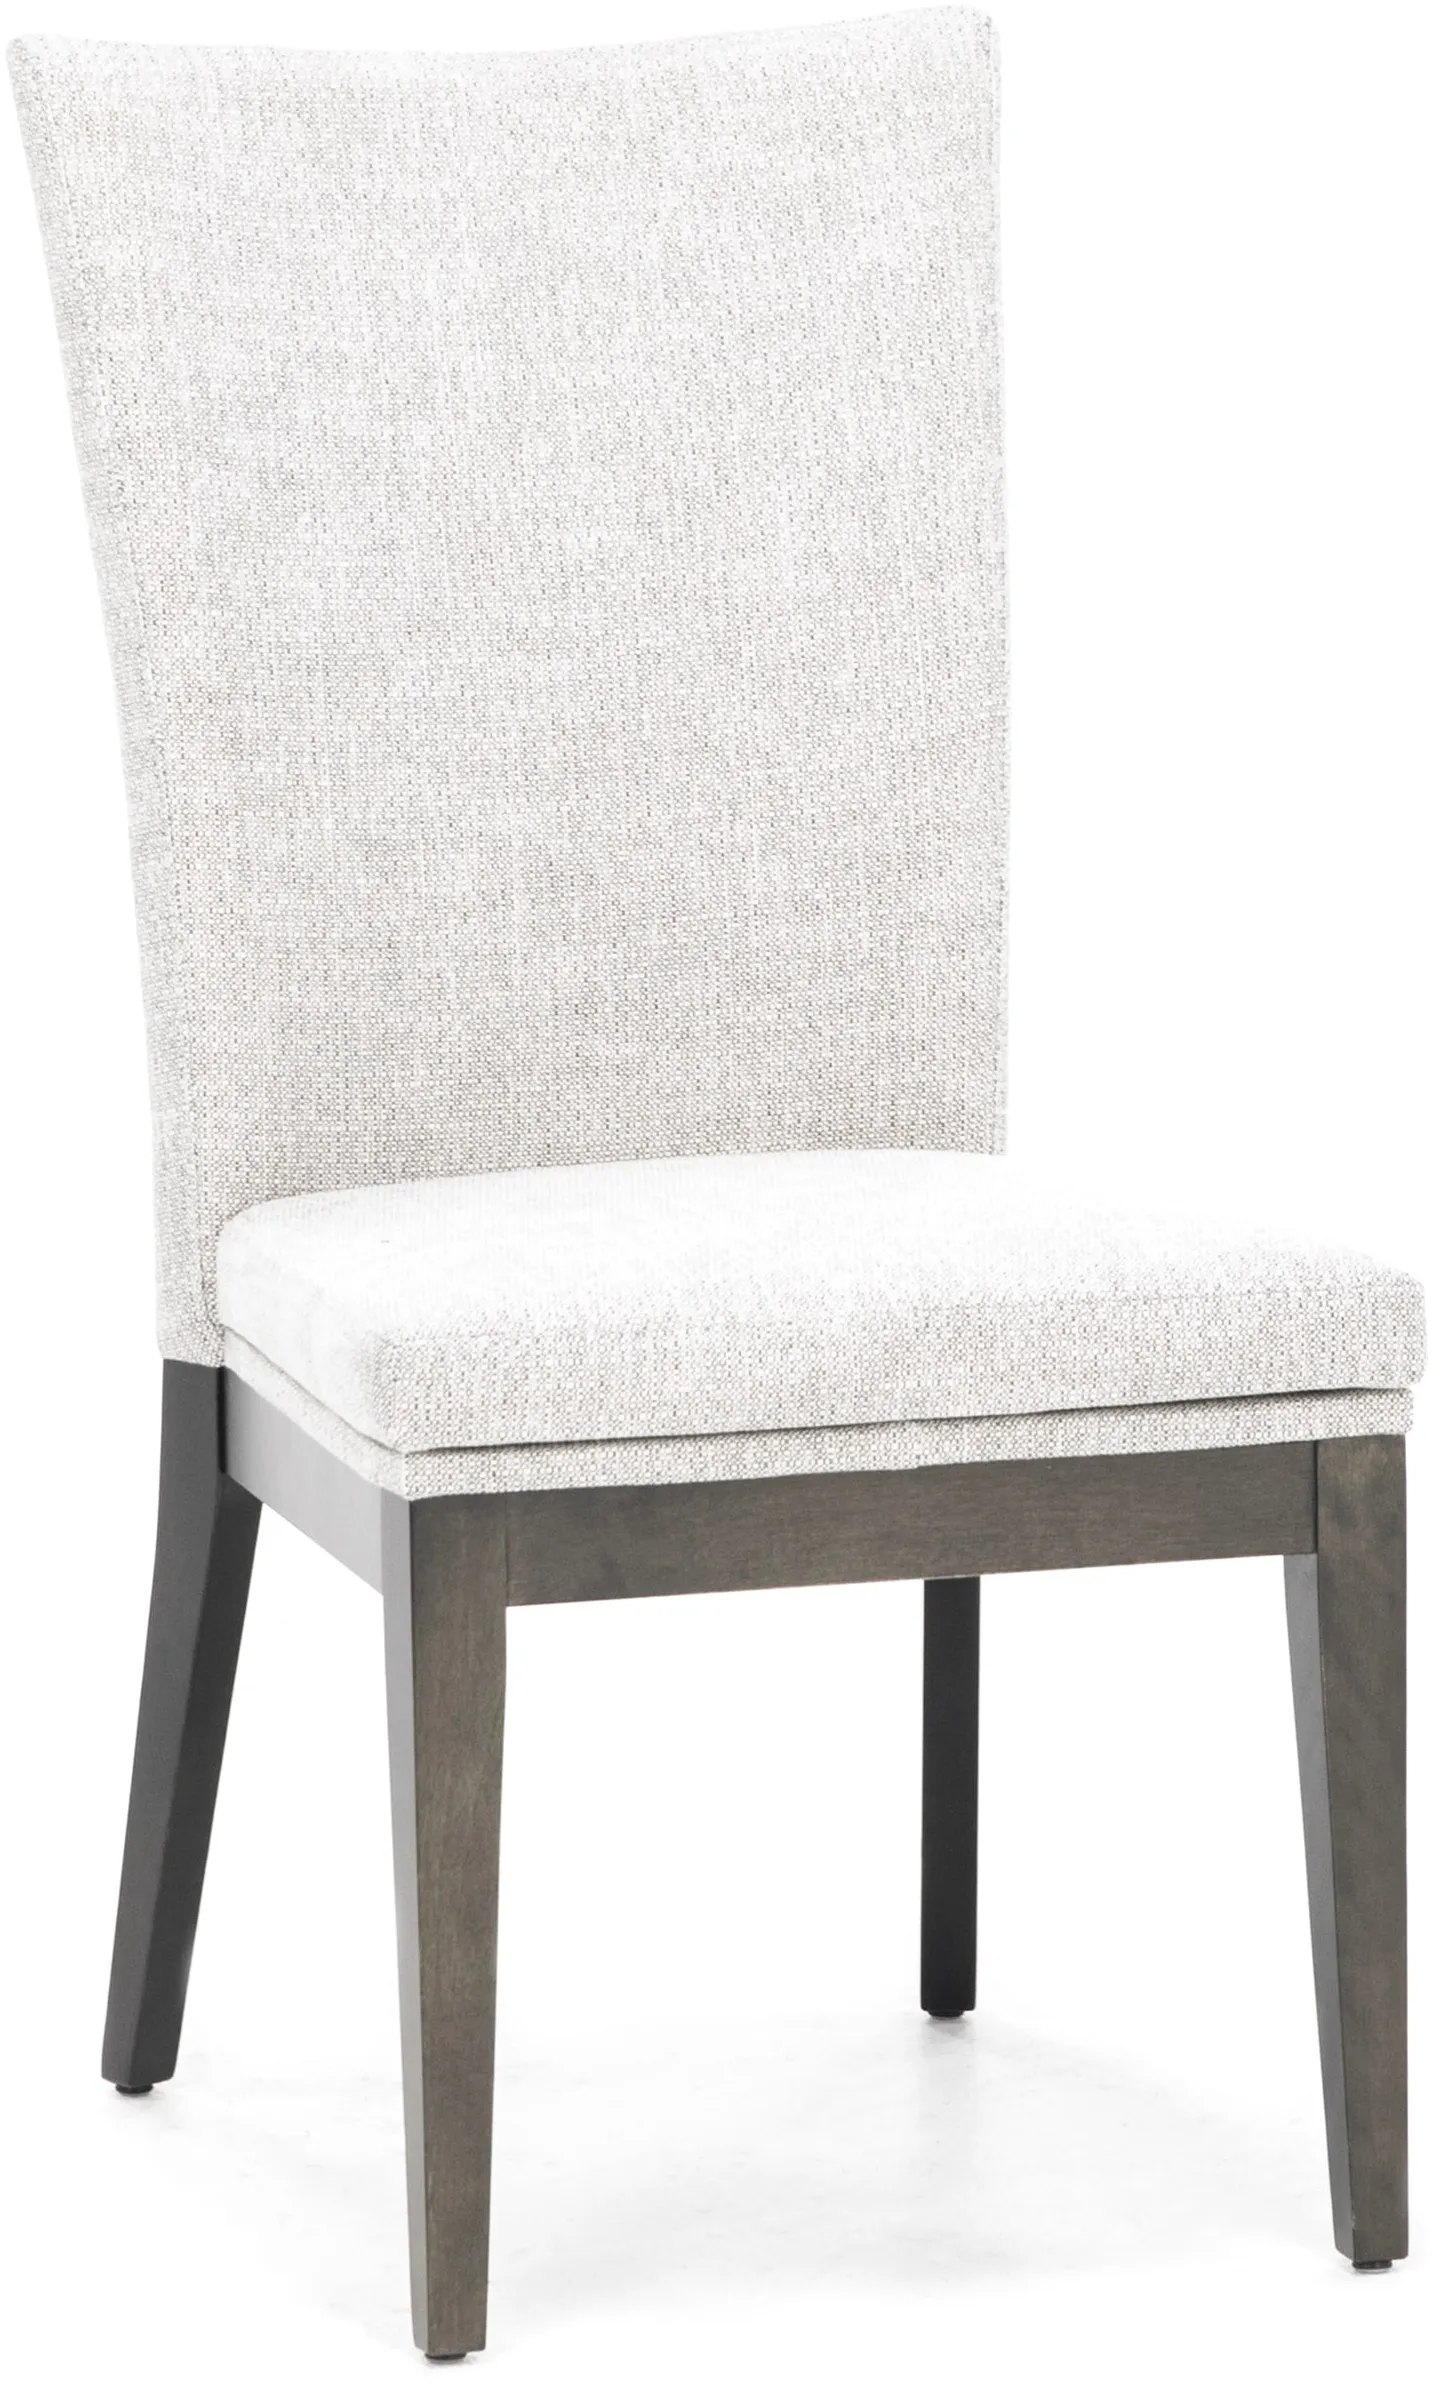 Canadel Core Upholstered Side Chair 5014